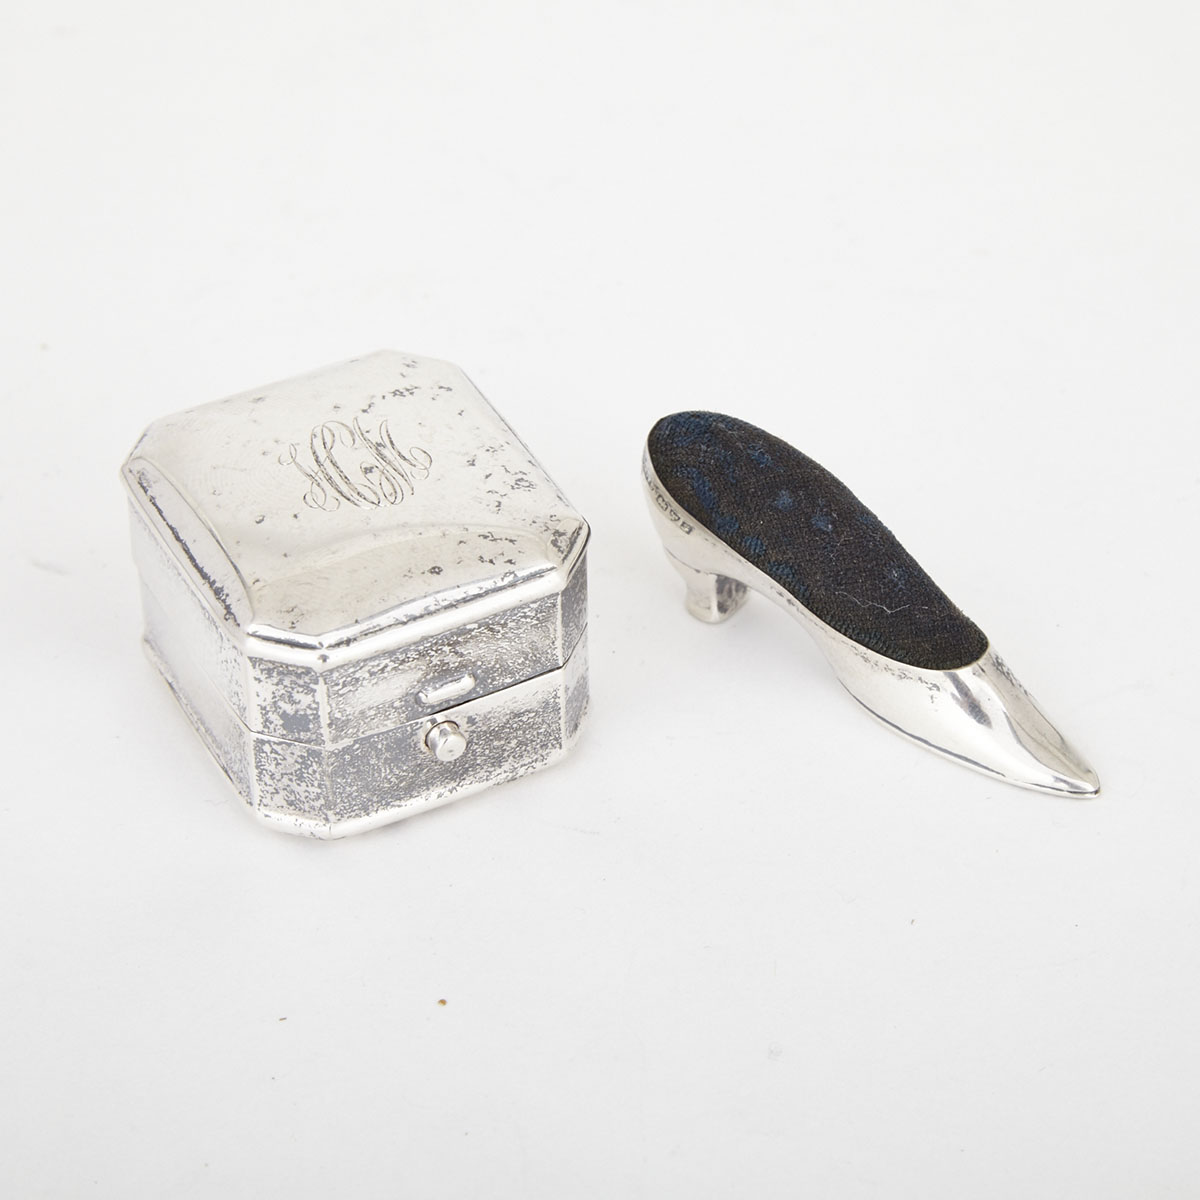 Canadian Silver Ring Box, Henry Birks & Sons, Montreal, Que., 20th century and an Edwardian Silver Mounted Shoe Pin Cushion, Cornelius Saunders & Frank Shepherd, Chester, 1906